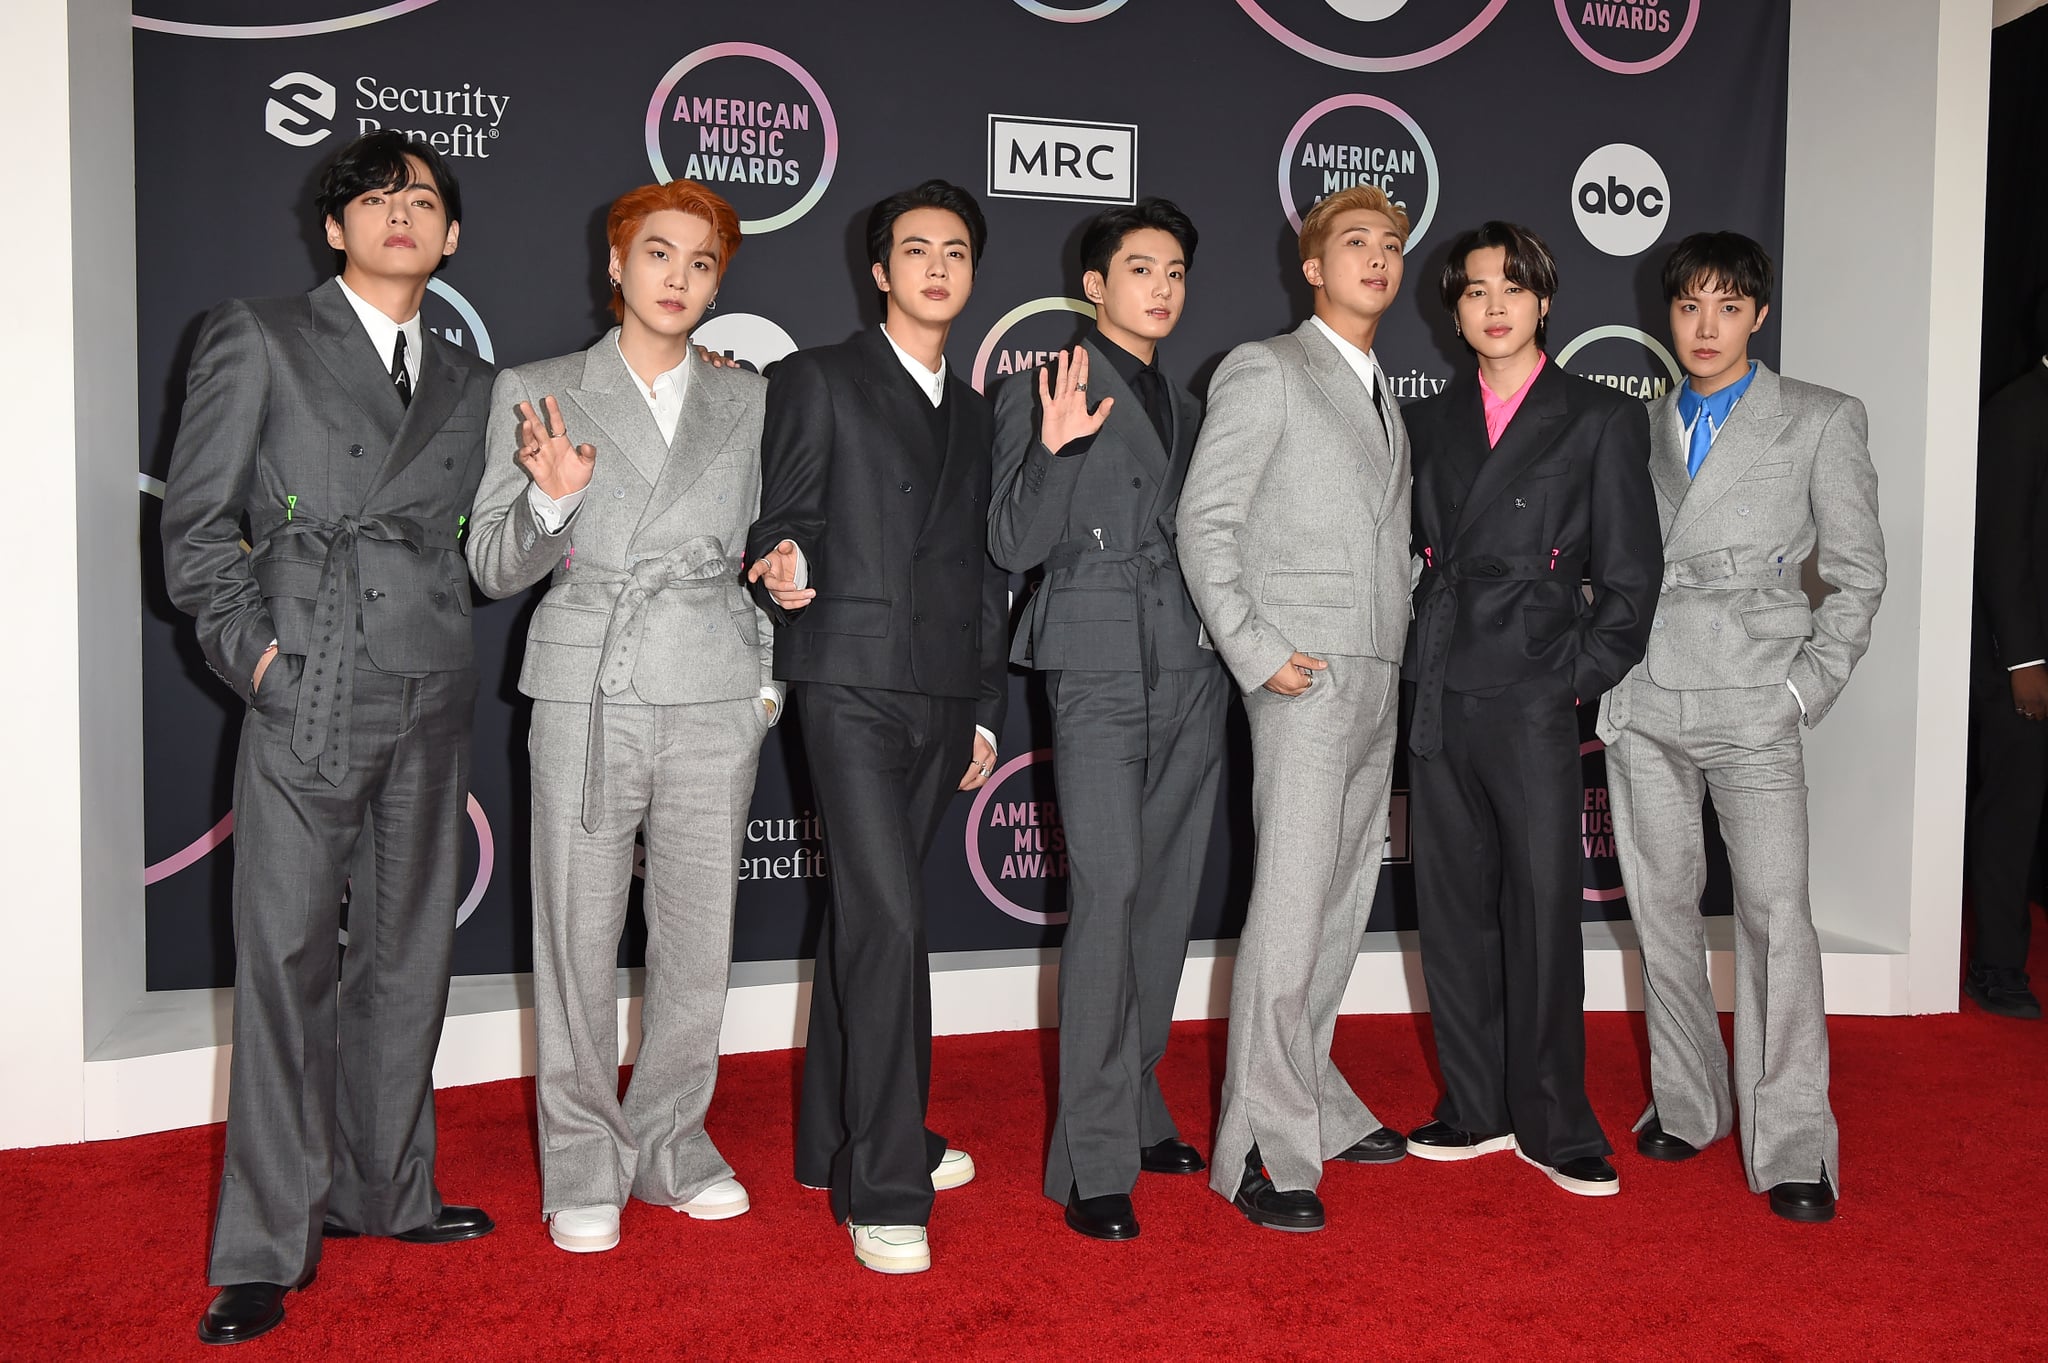 LOS ANGELES, CALIFORNIA - NOVEMBER 21: (L-R) V, Suga, Jin, Jungkook, RM, Jimin, and J-Hope of BTS attend the 2021 American Music Awards at Microsoft Theatre on November 21, 2021 in Los Angeles, California. (Photo by Axelle/Bauer-Griffin/FilmMagic)